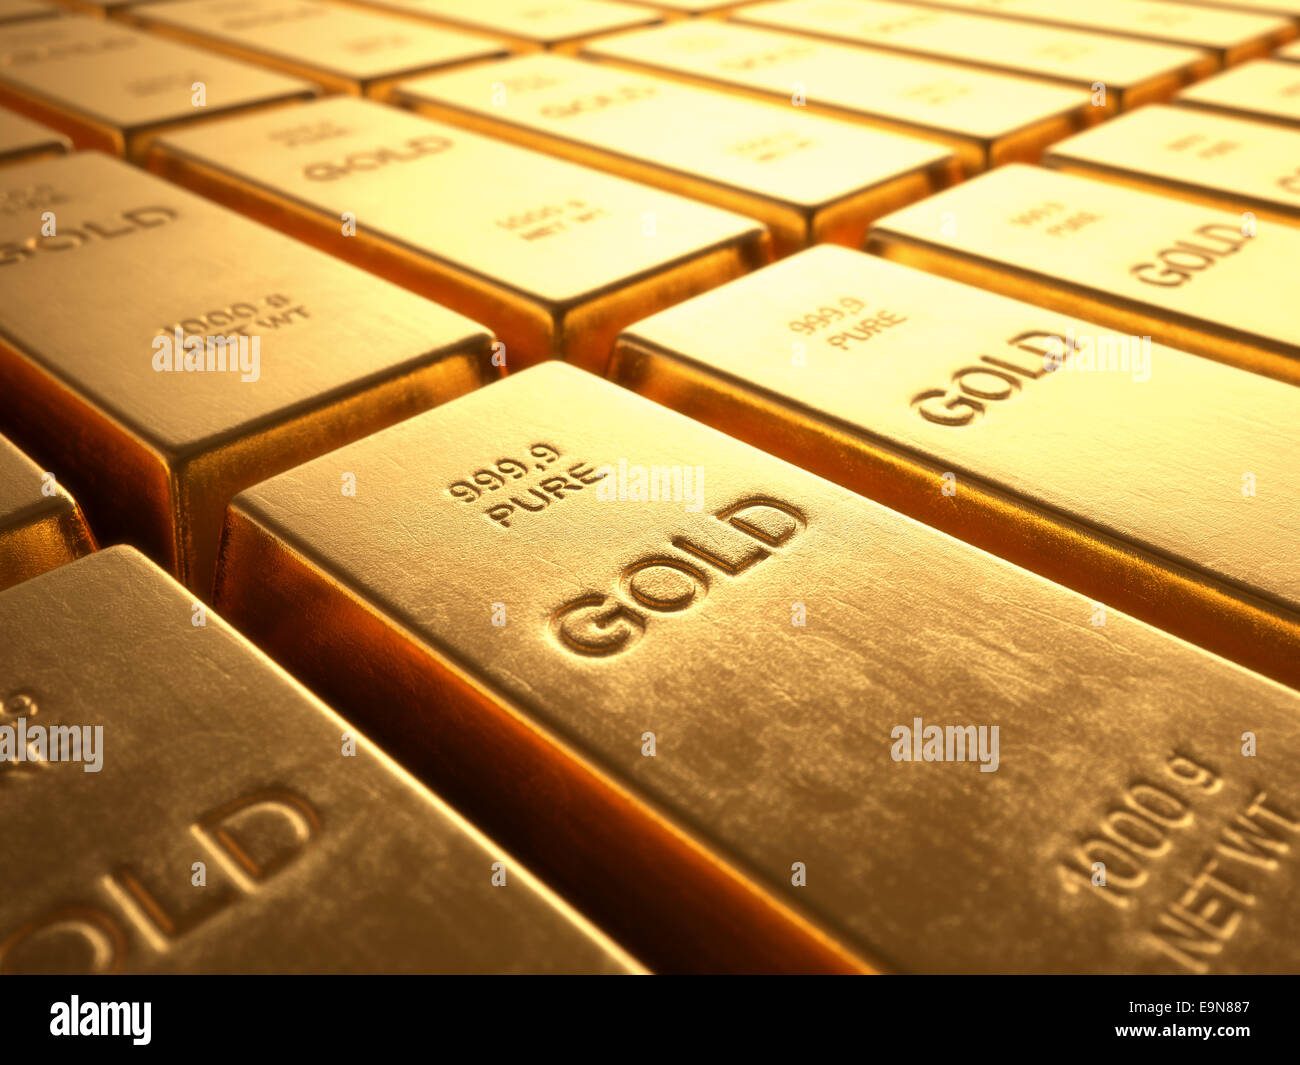 Gold Bars 1000 grams. Concept of wealth and reserve. Stock Photo